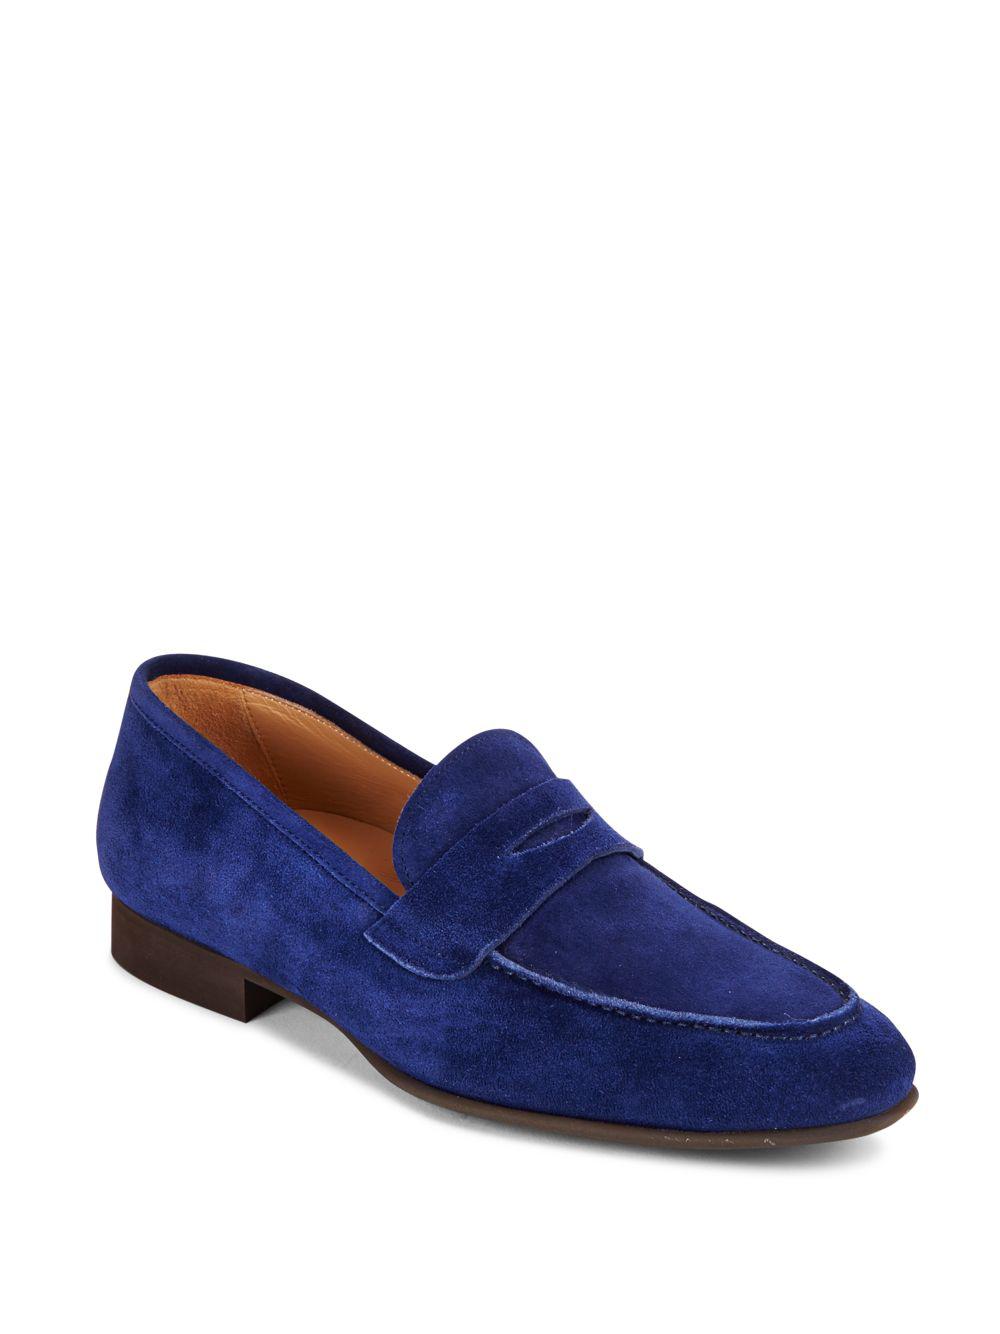 Di Bianco Hand Made Italian Leather Loafers for Men - Lyst